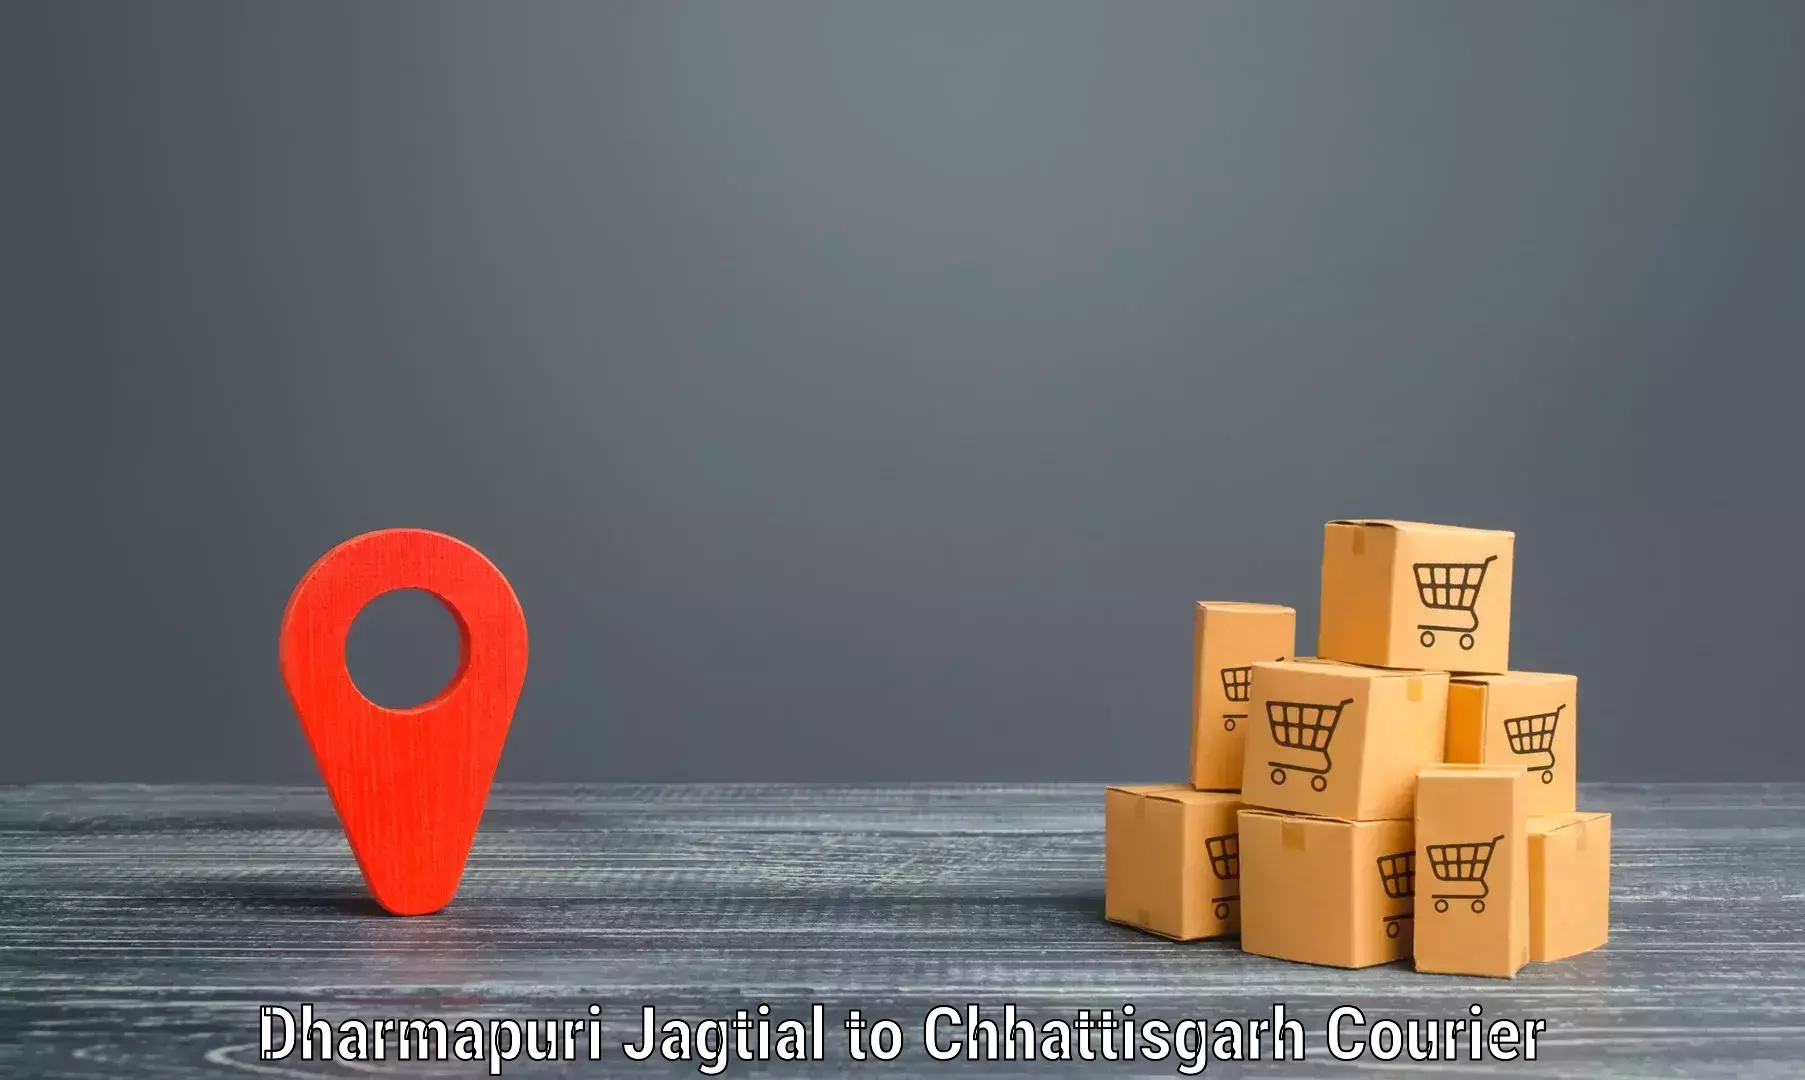 Premium courier services in Dharmapuri Jagtial to Rajnandgaon